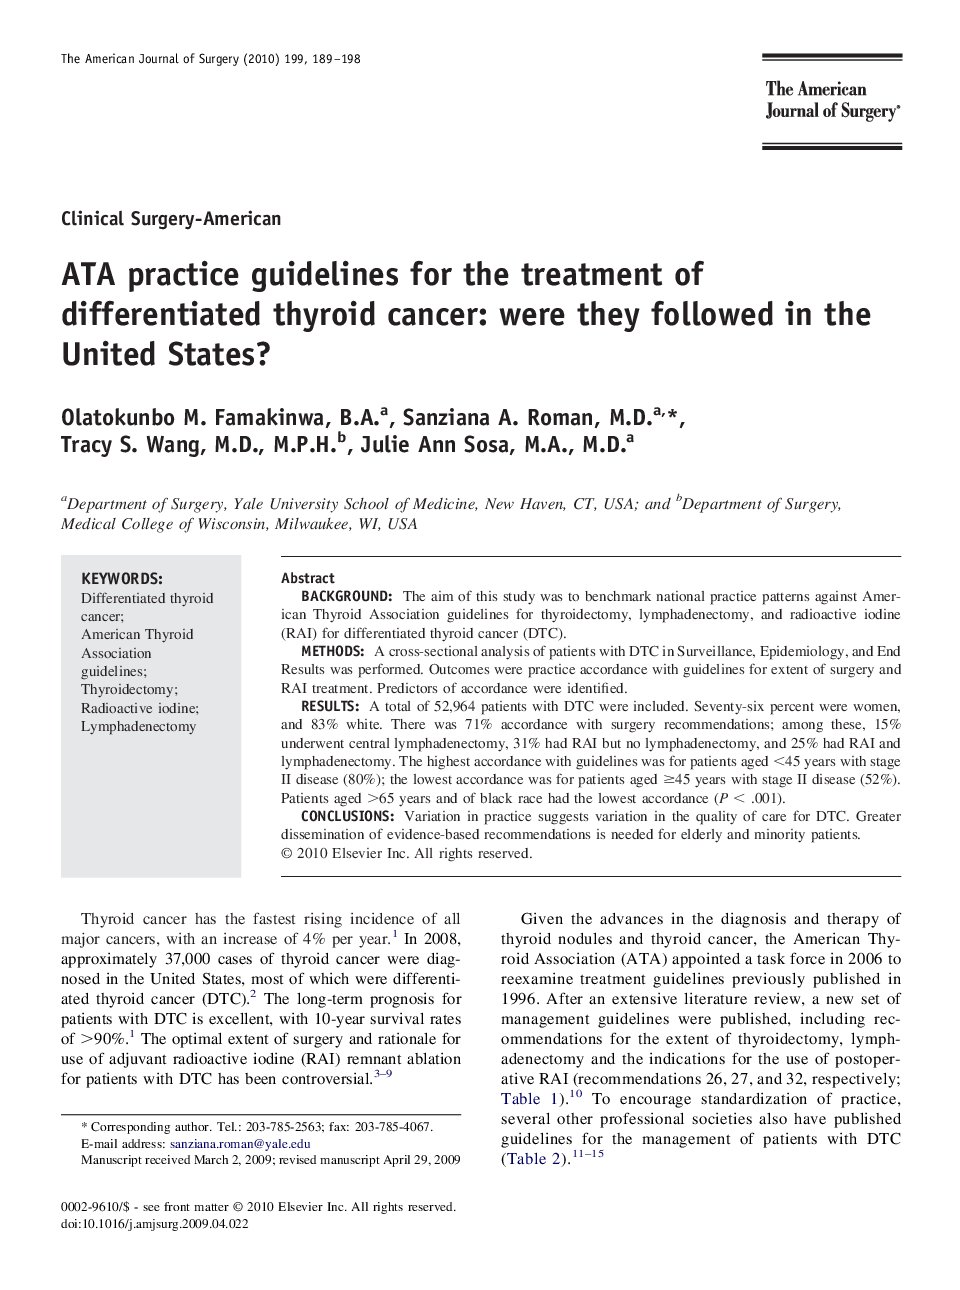 ATA practice guidelines for the treatment of differentiated thyroid cancer: were they followed in the United States?